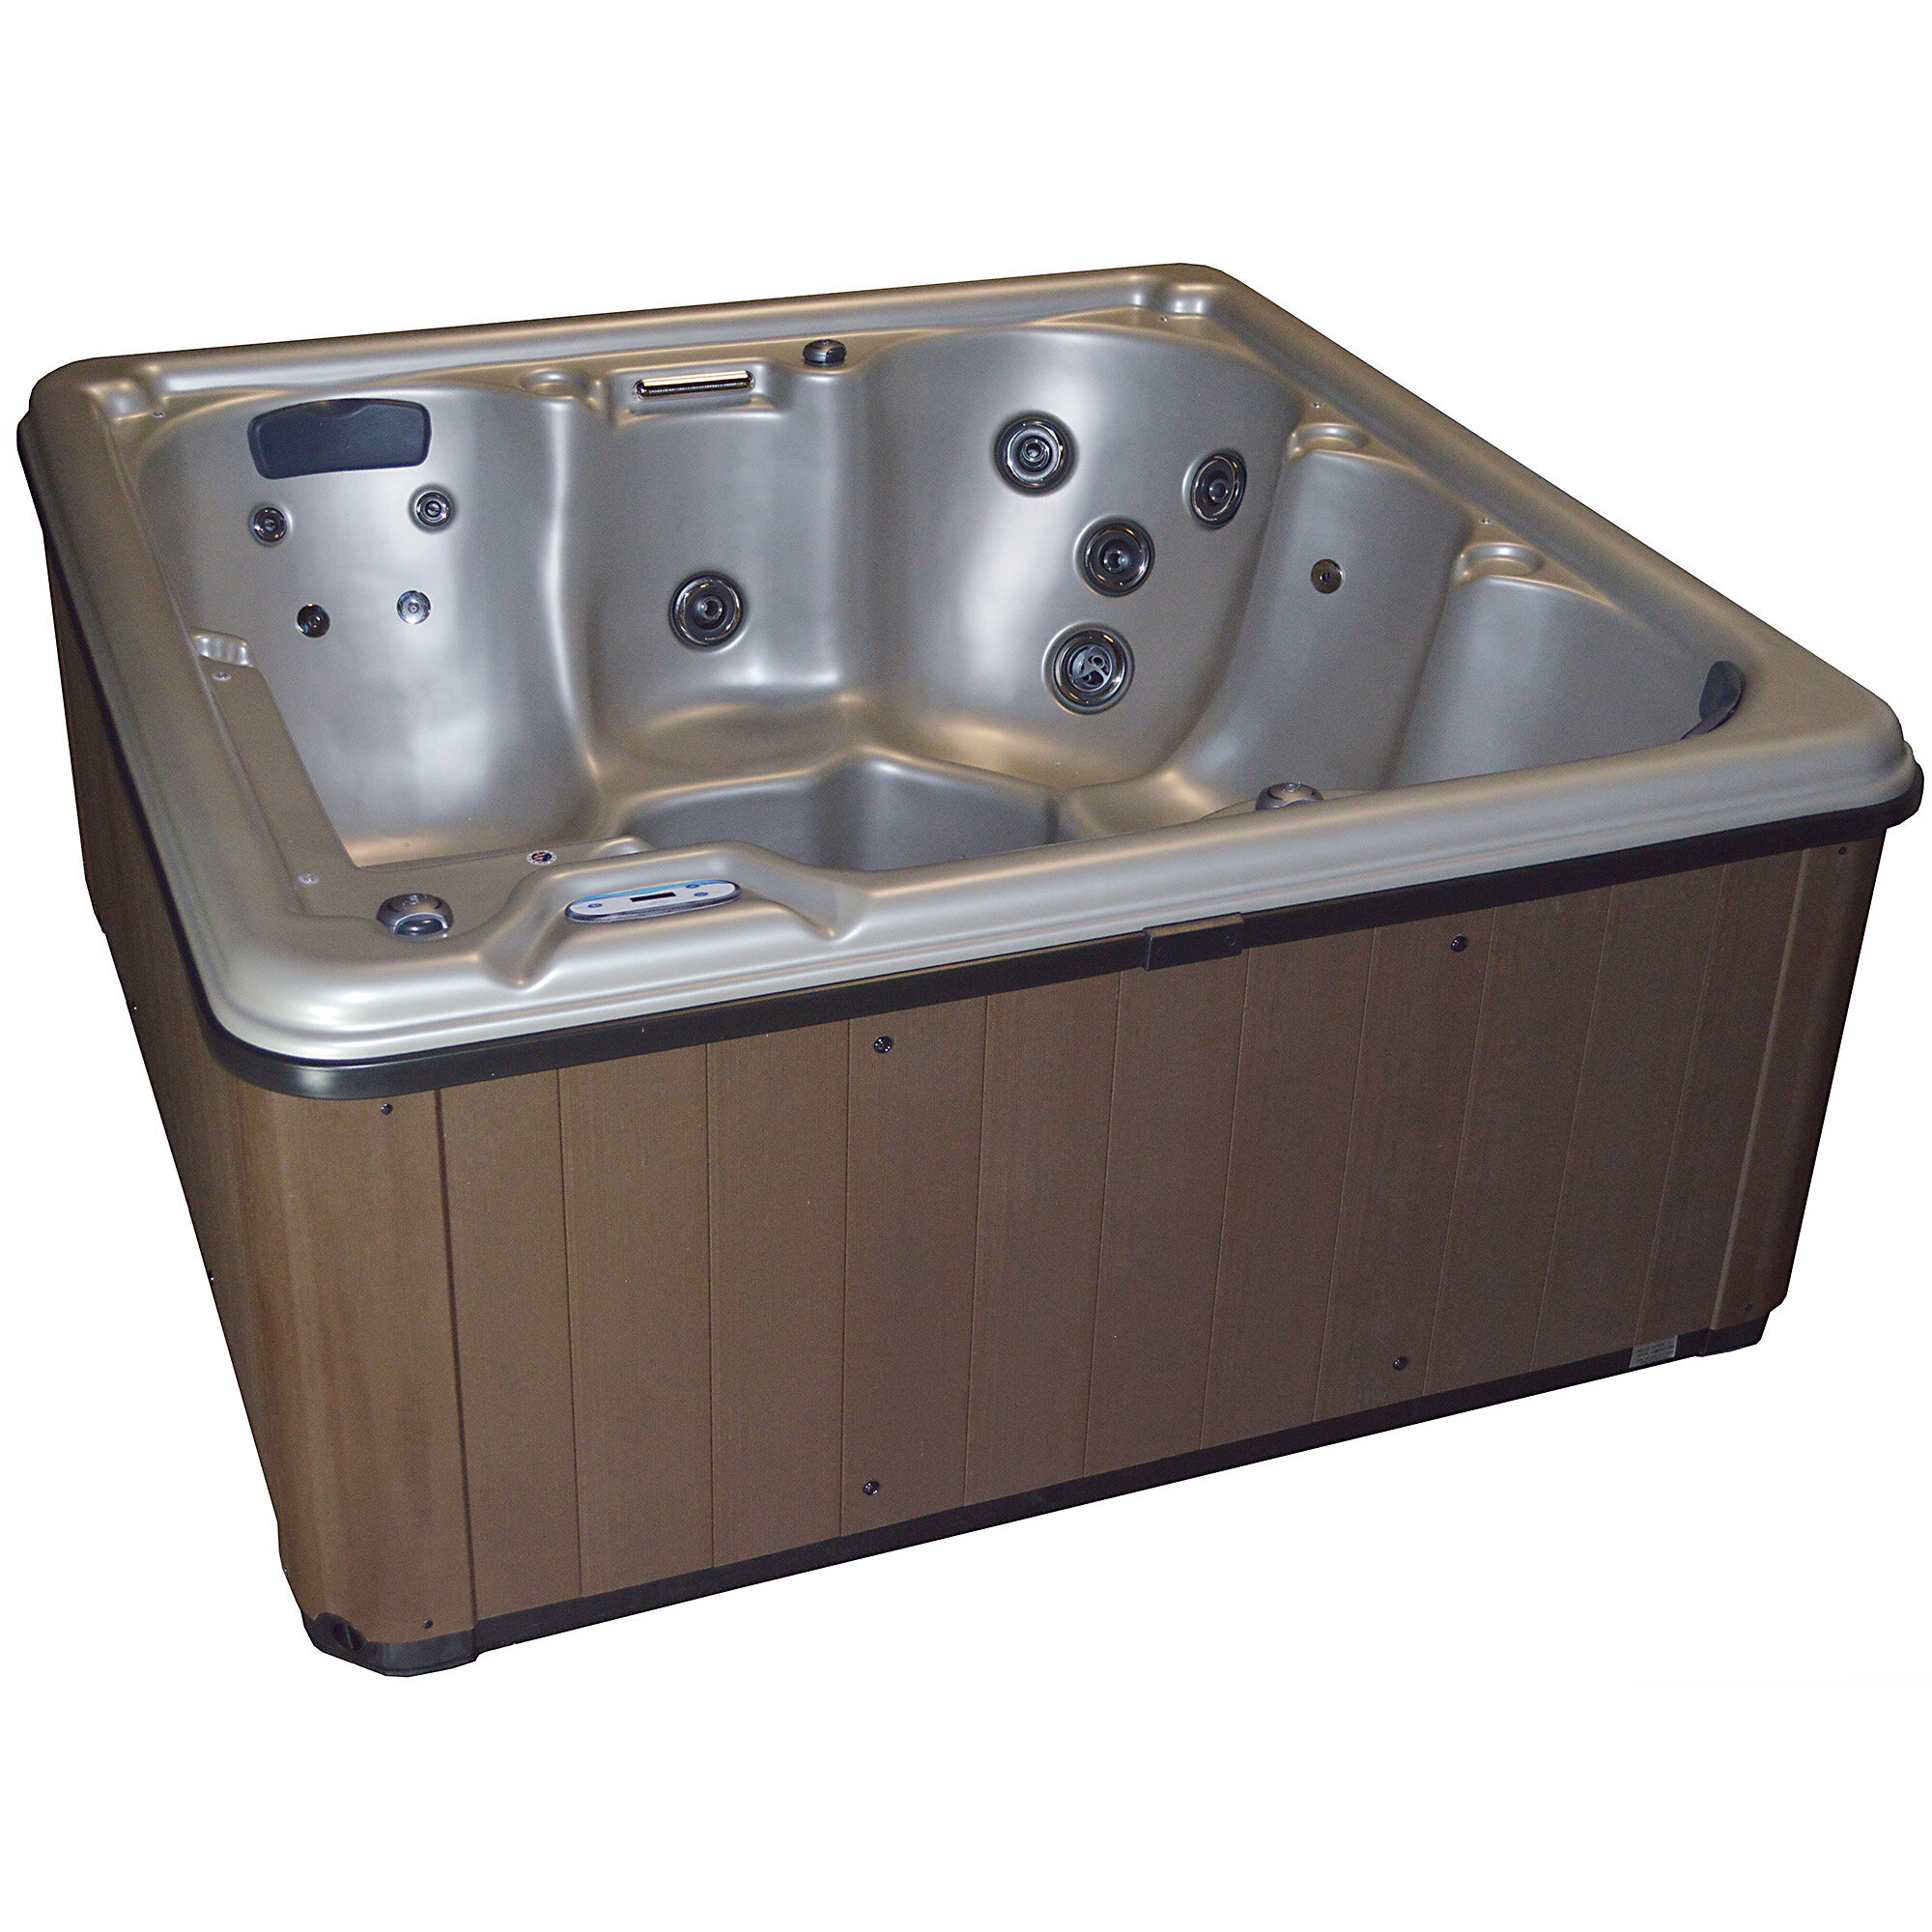 6 Person 21 Jet Plug And Play Hot Tub